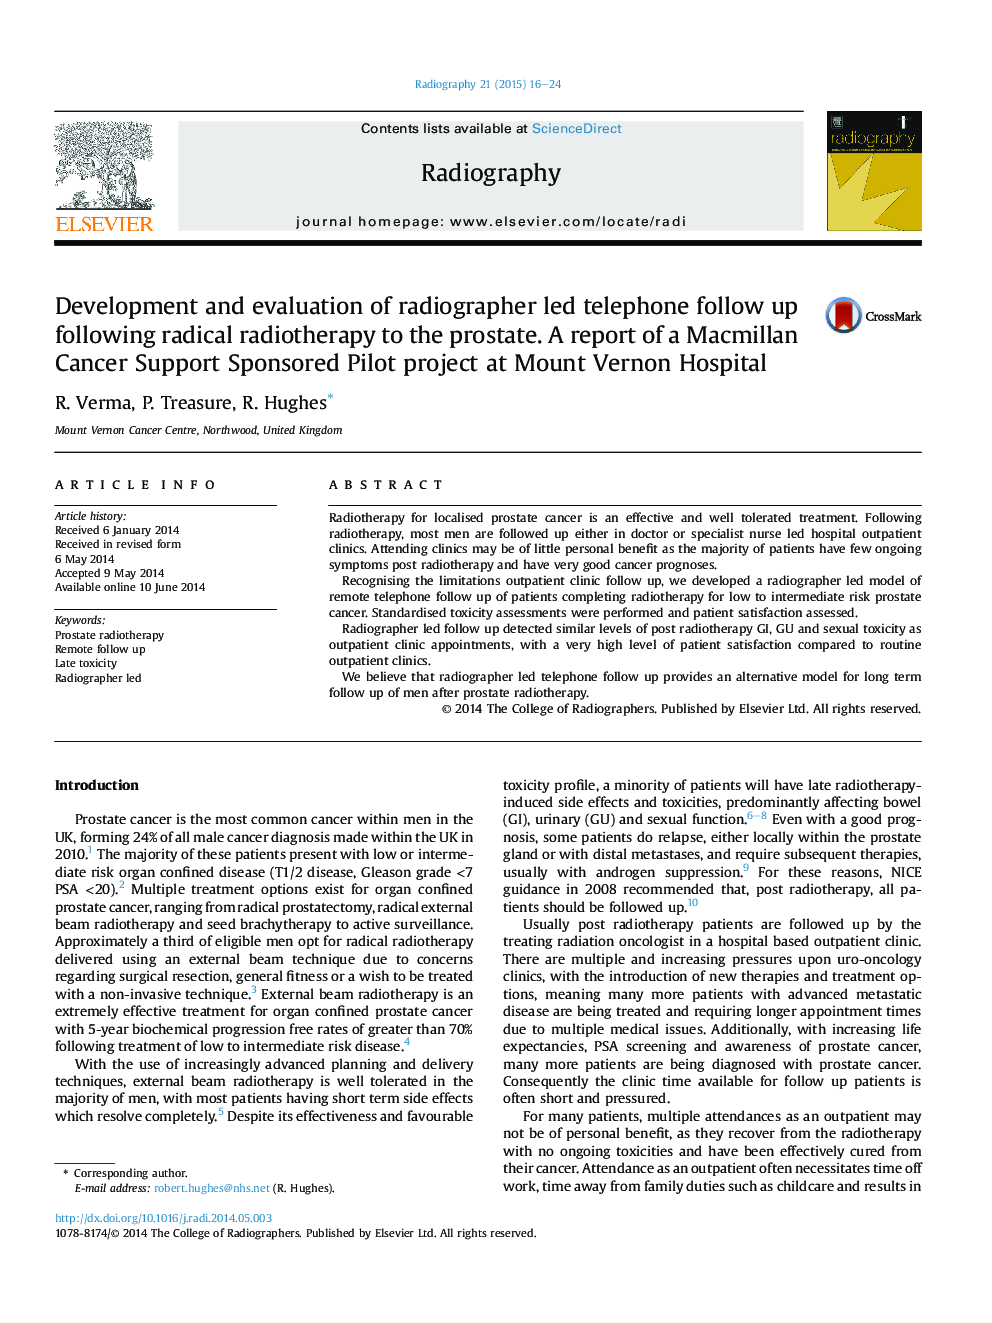 Development and evaluation of radiographer led telephone follow up following radical radiotherapy to the prostate. A report of a Macmillan Cancer Support Sponsored Pilot project at Mount Vernon Hospital